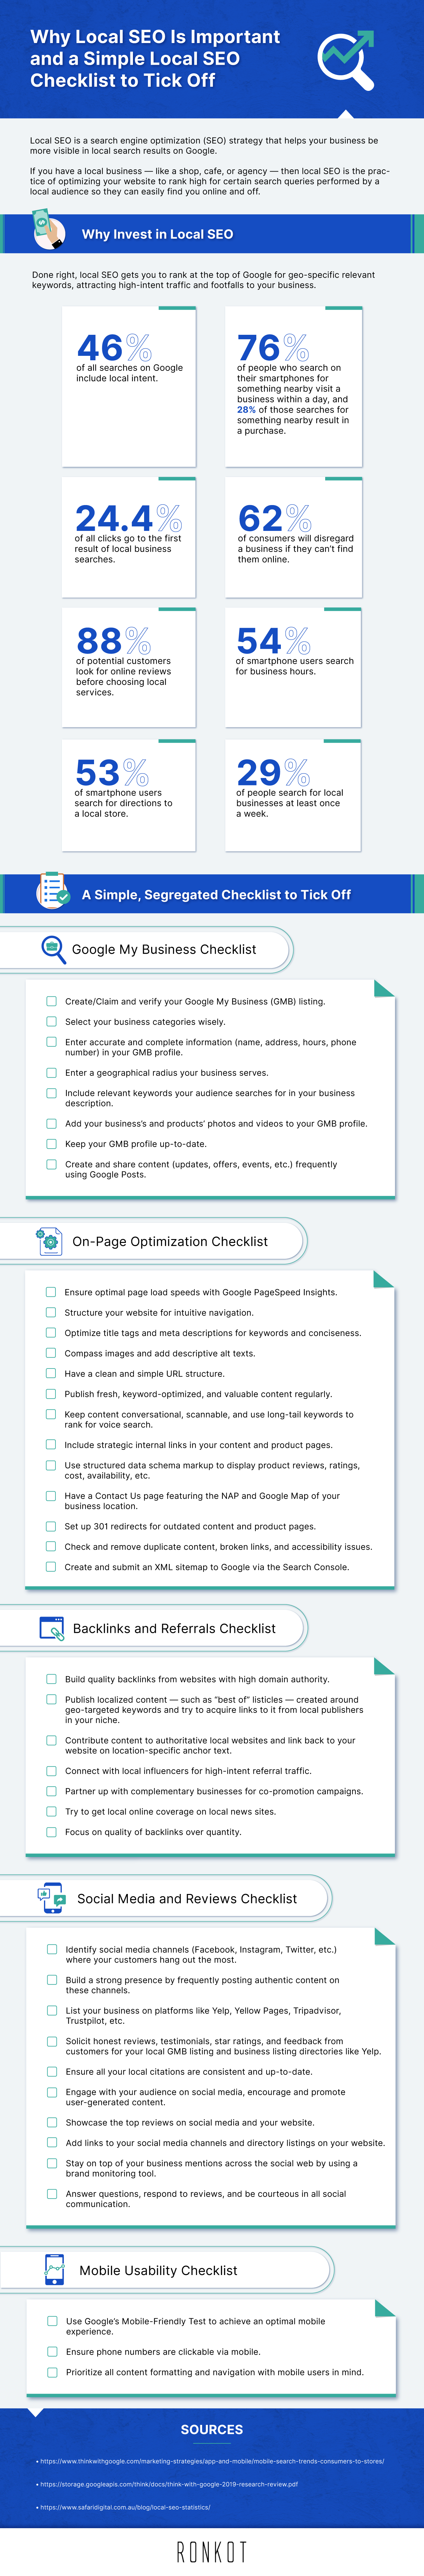 Best Local SEO Practices to Supercharge Your Rankings [Infographic]